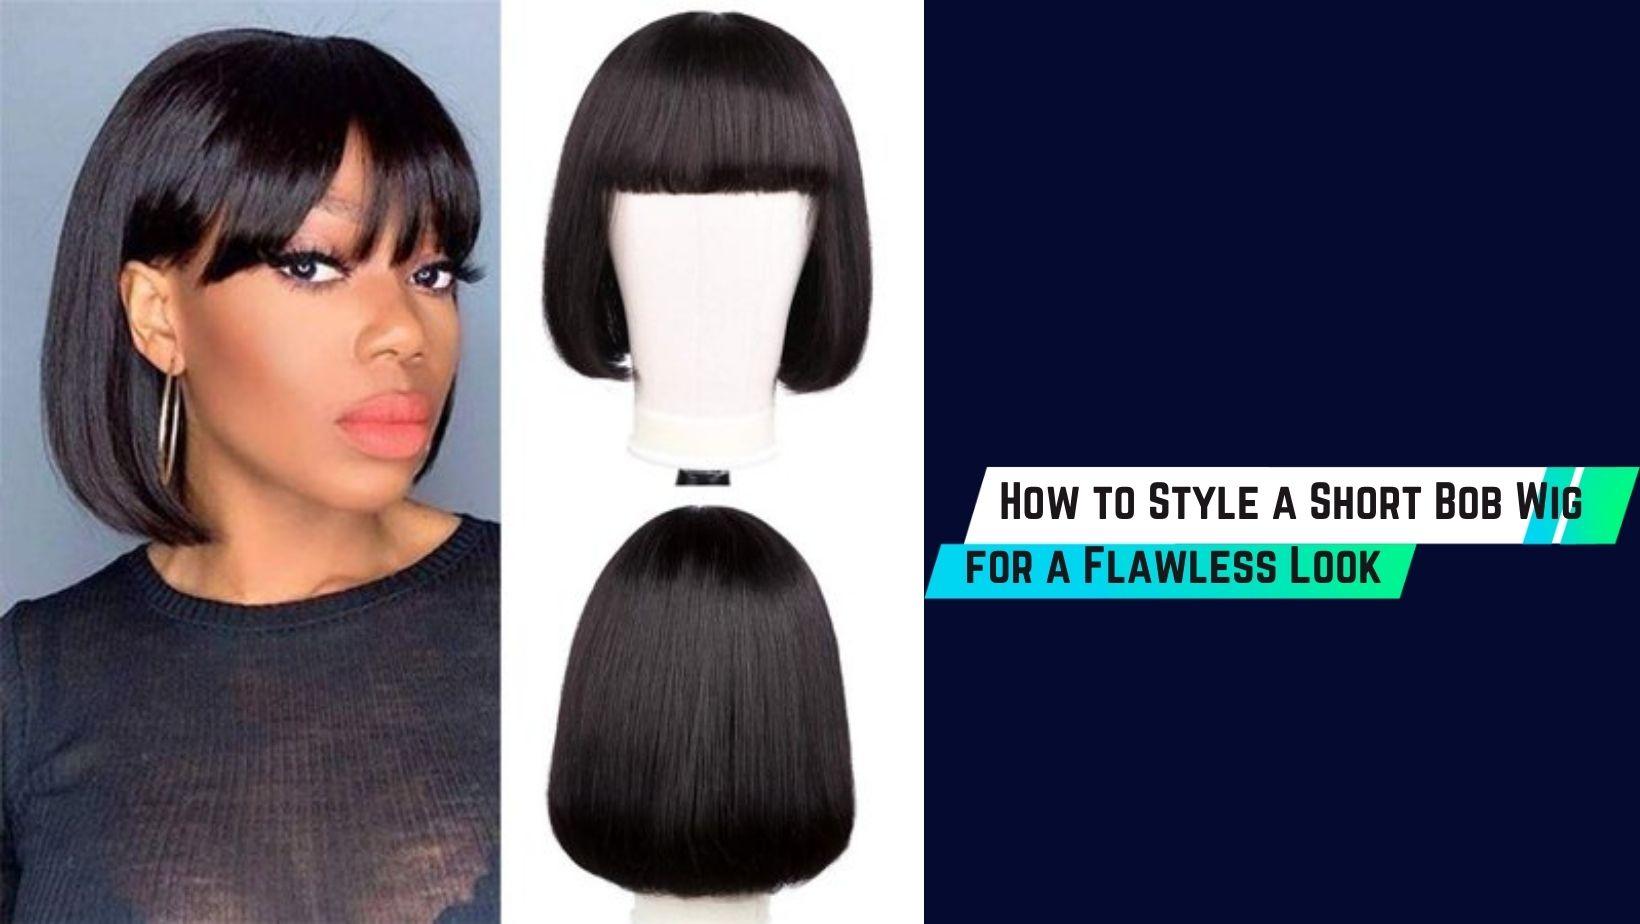 How to Style a Short Bob Wig